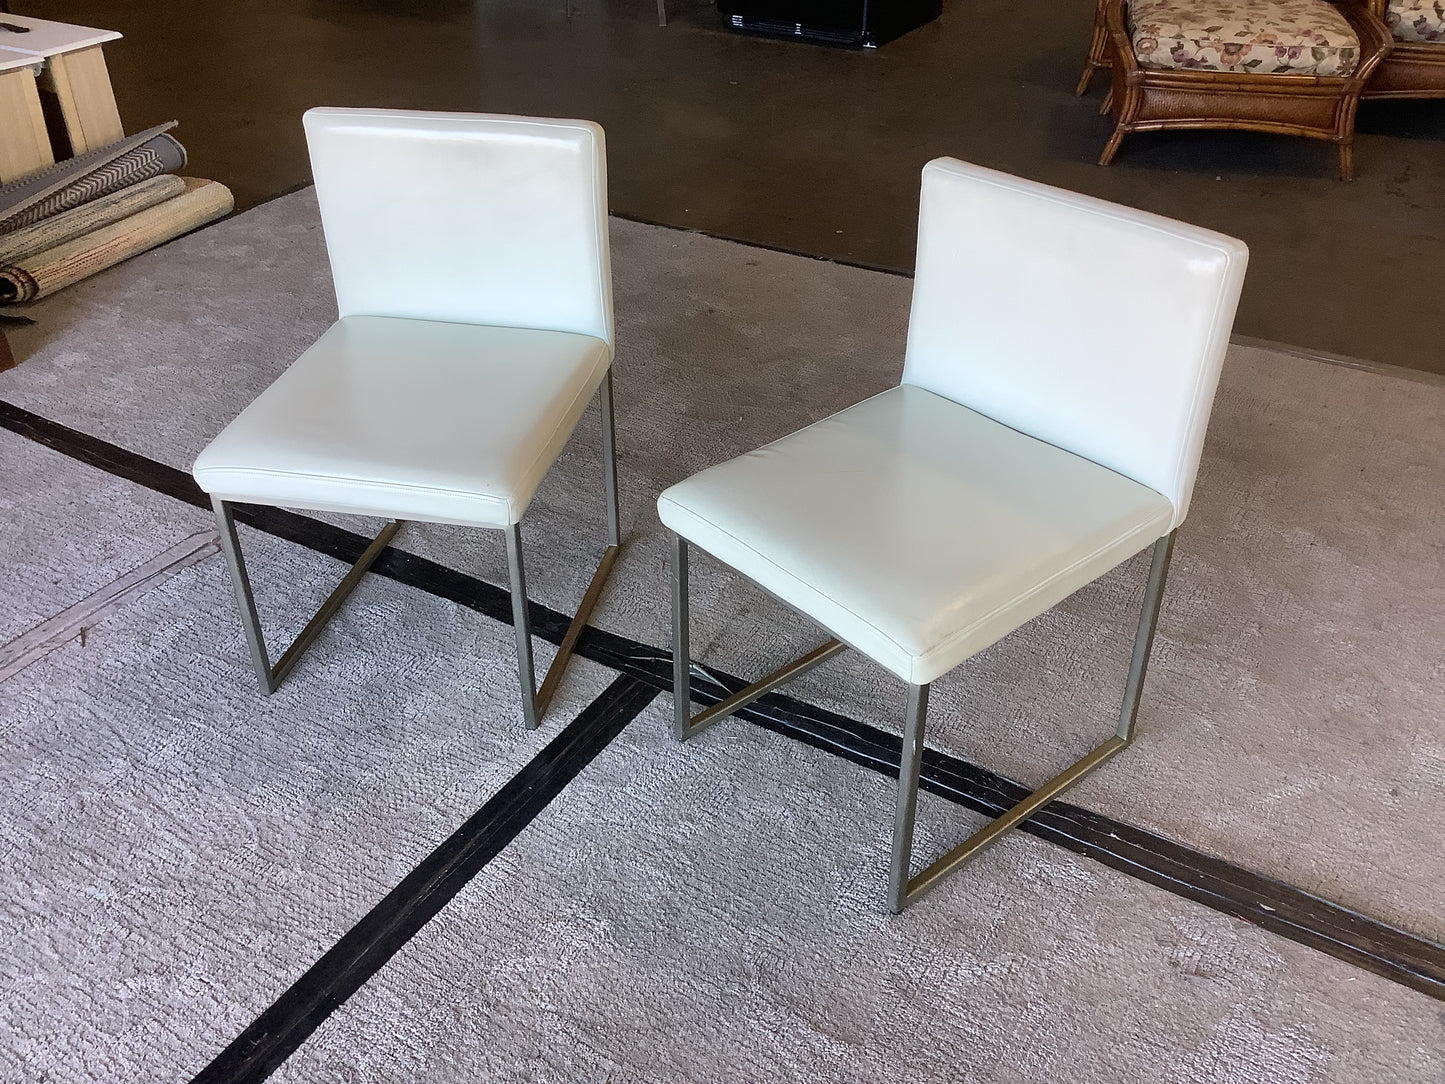 Pair of white side chairs (FB)